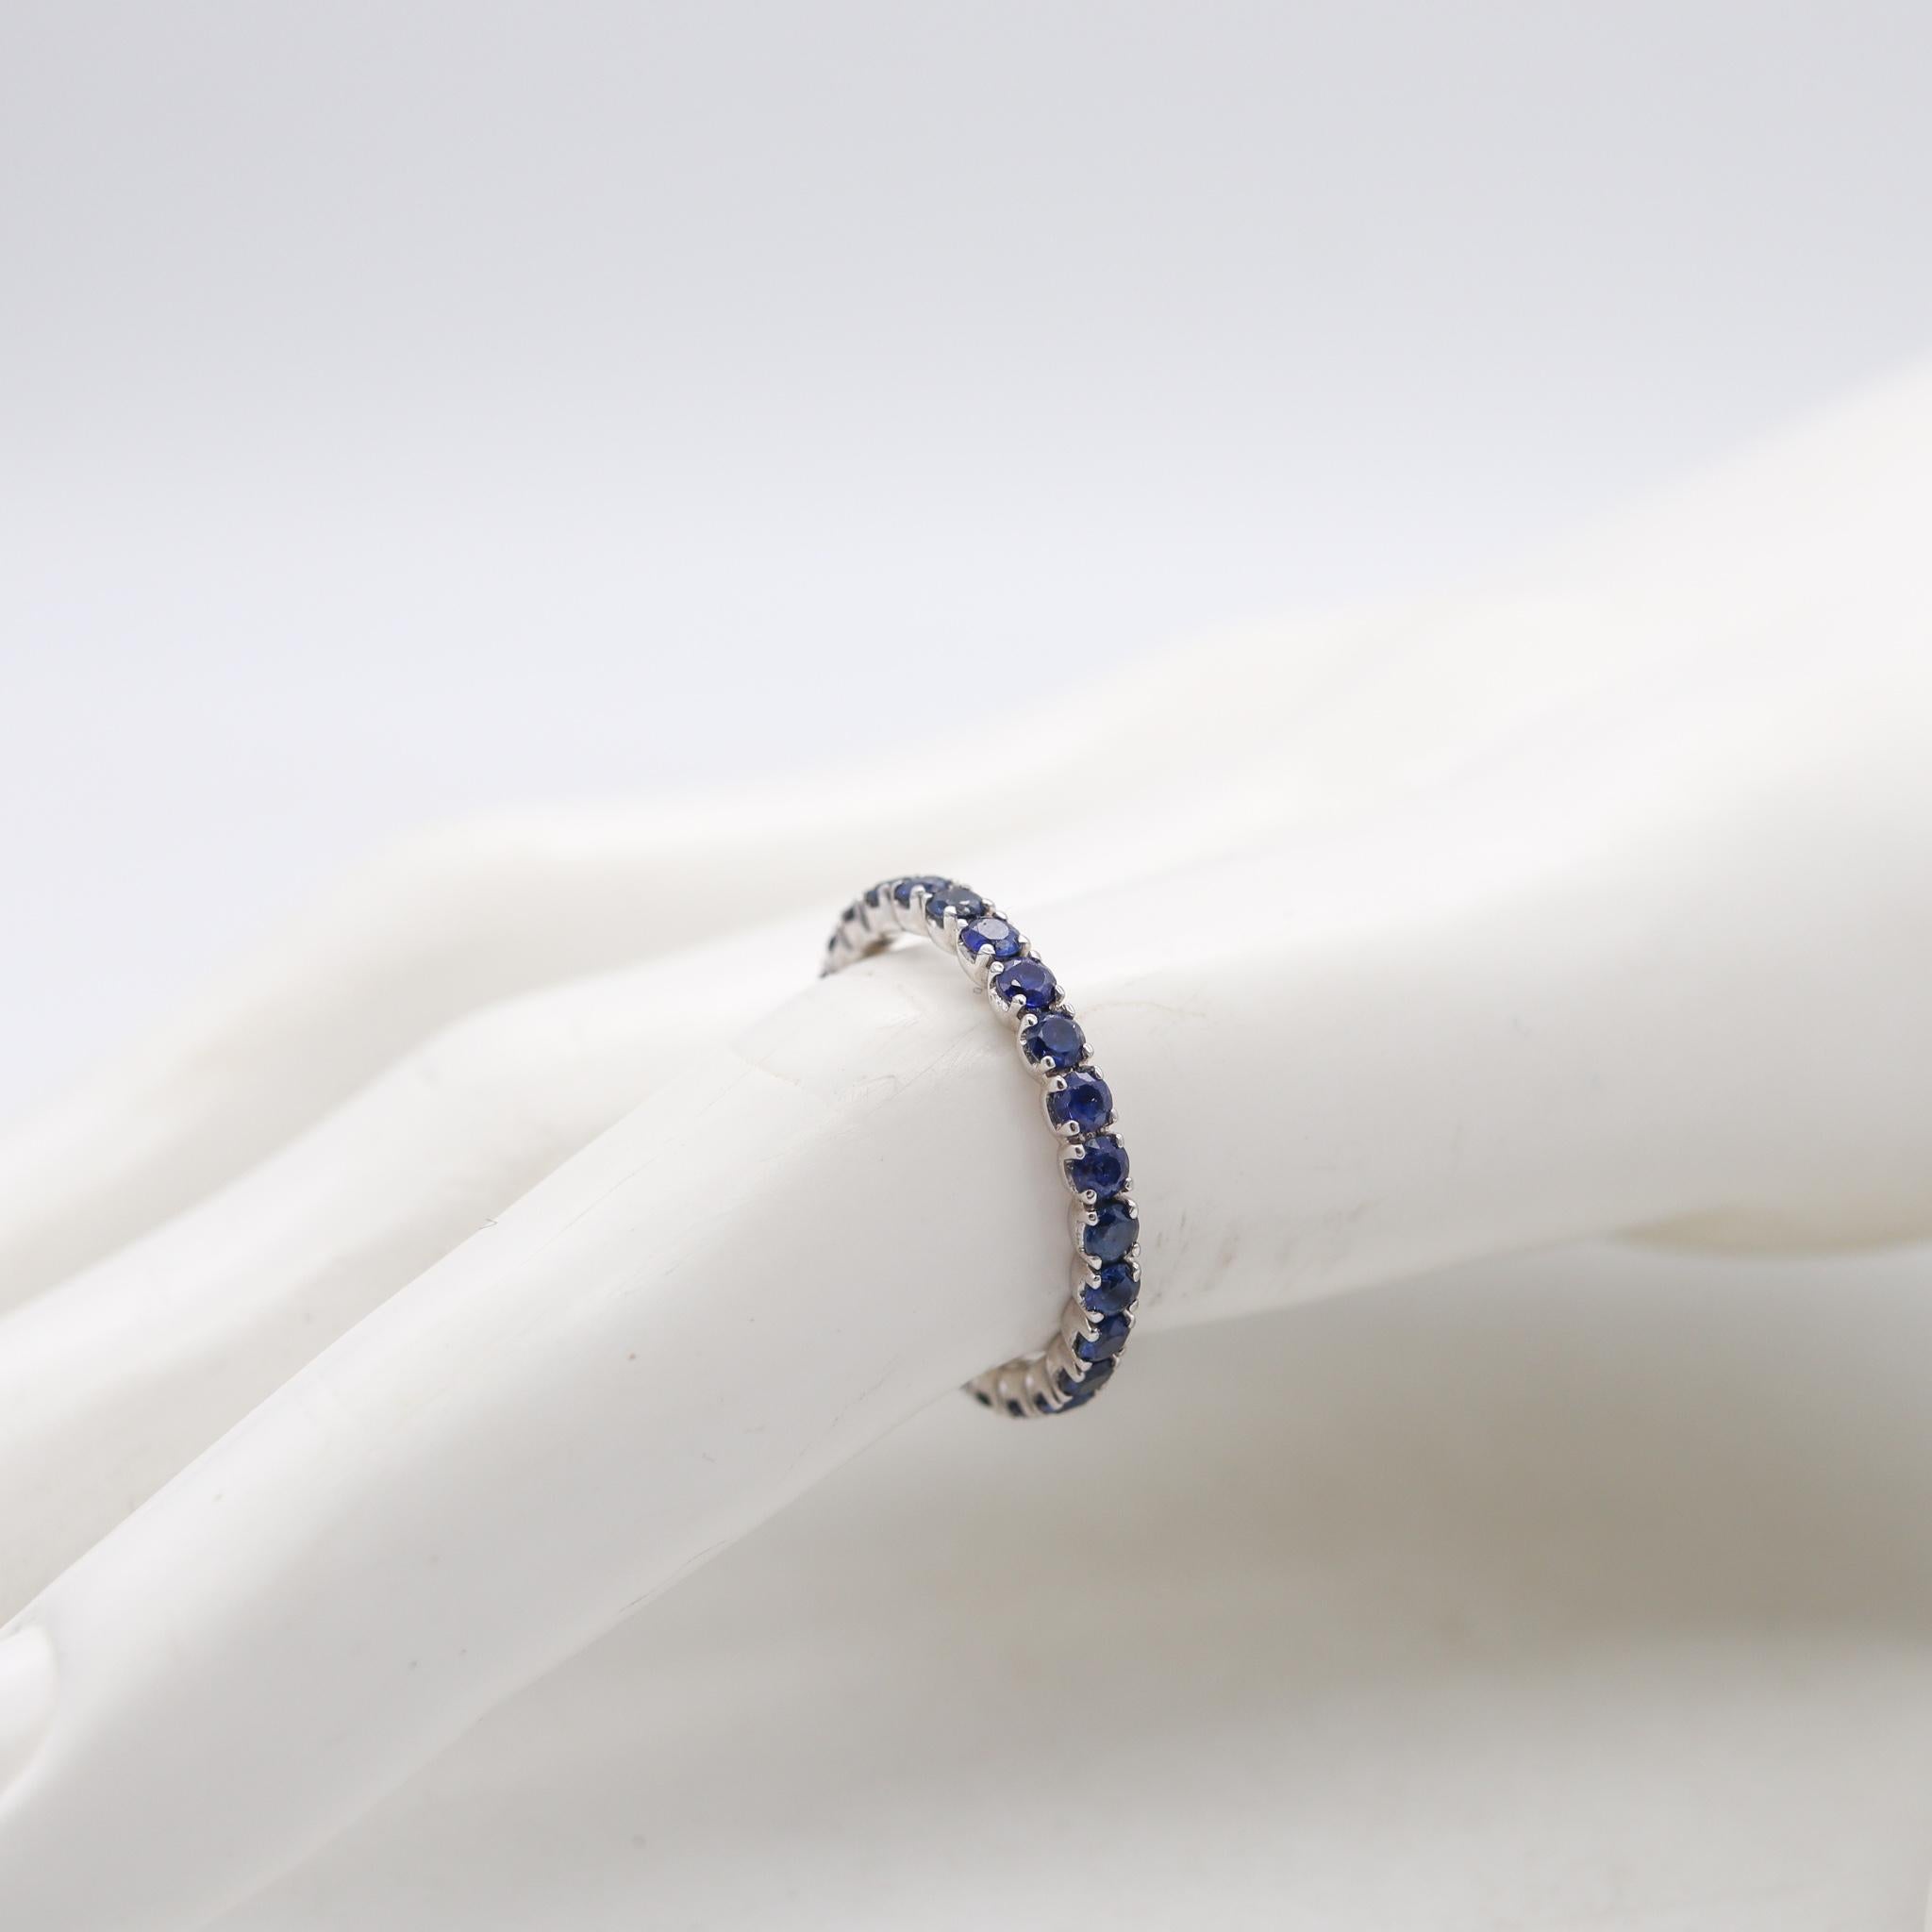 Eternity Ring Band in 18Kt White Gold with 1.25 Carats in Ceylon Blue Sapphires In Excellent Condition For Sale In Miami, FL